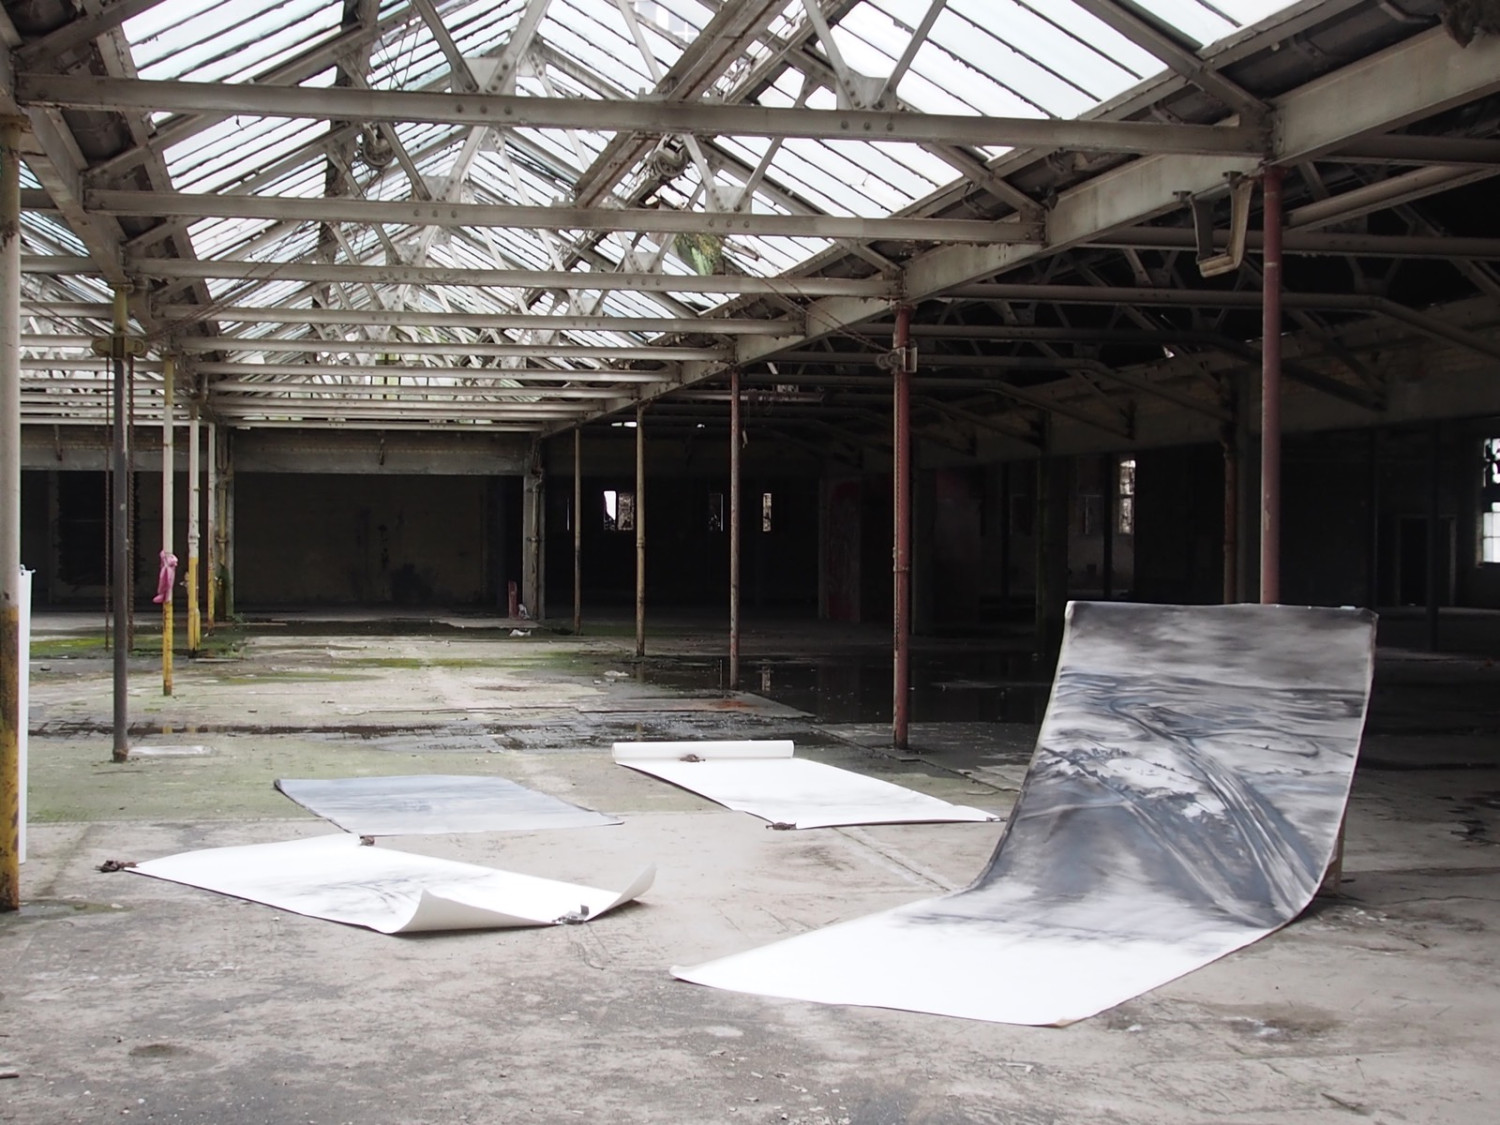 Virtual Exhibition staged in a disused factory